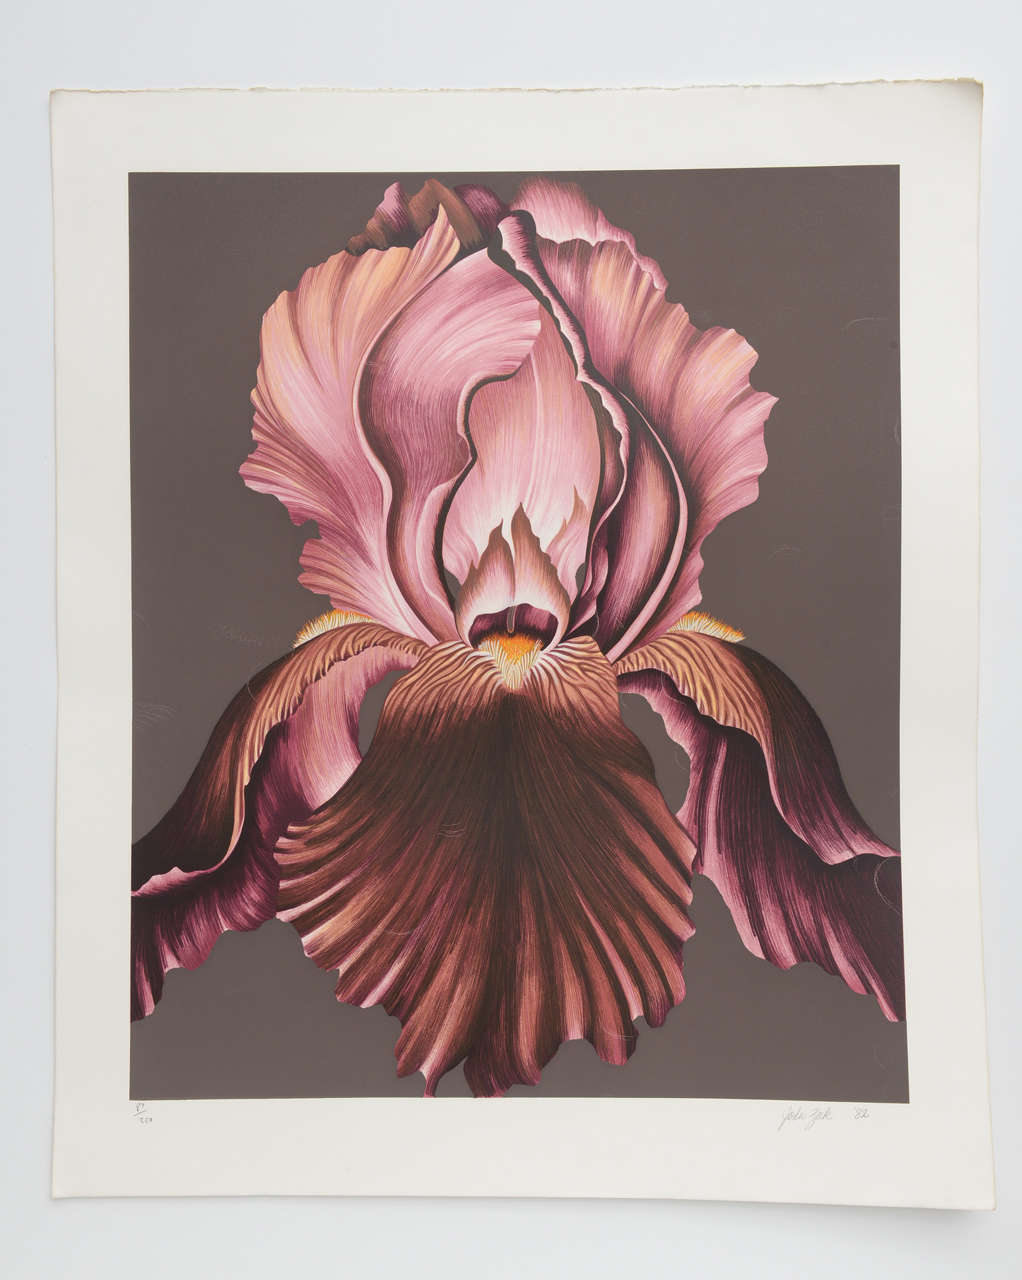 This limited edition lithographs, print is pencil signed and numbered 87/250, also stamped with the artists seal, this artist did a series of flowers, mostly orchids. He has won several award and showed his works in the USA throughout the 1980s. I